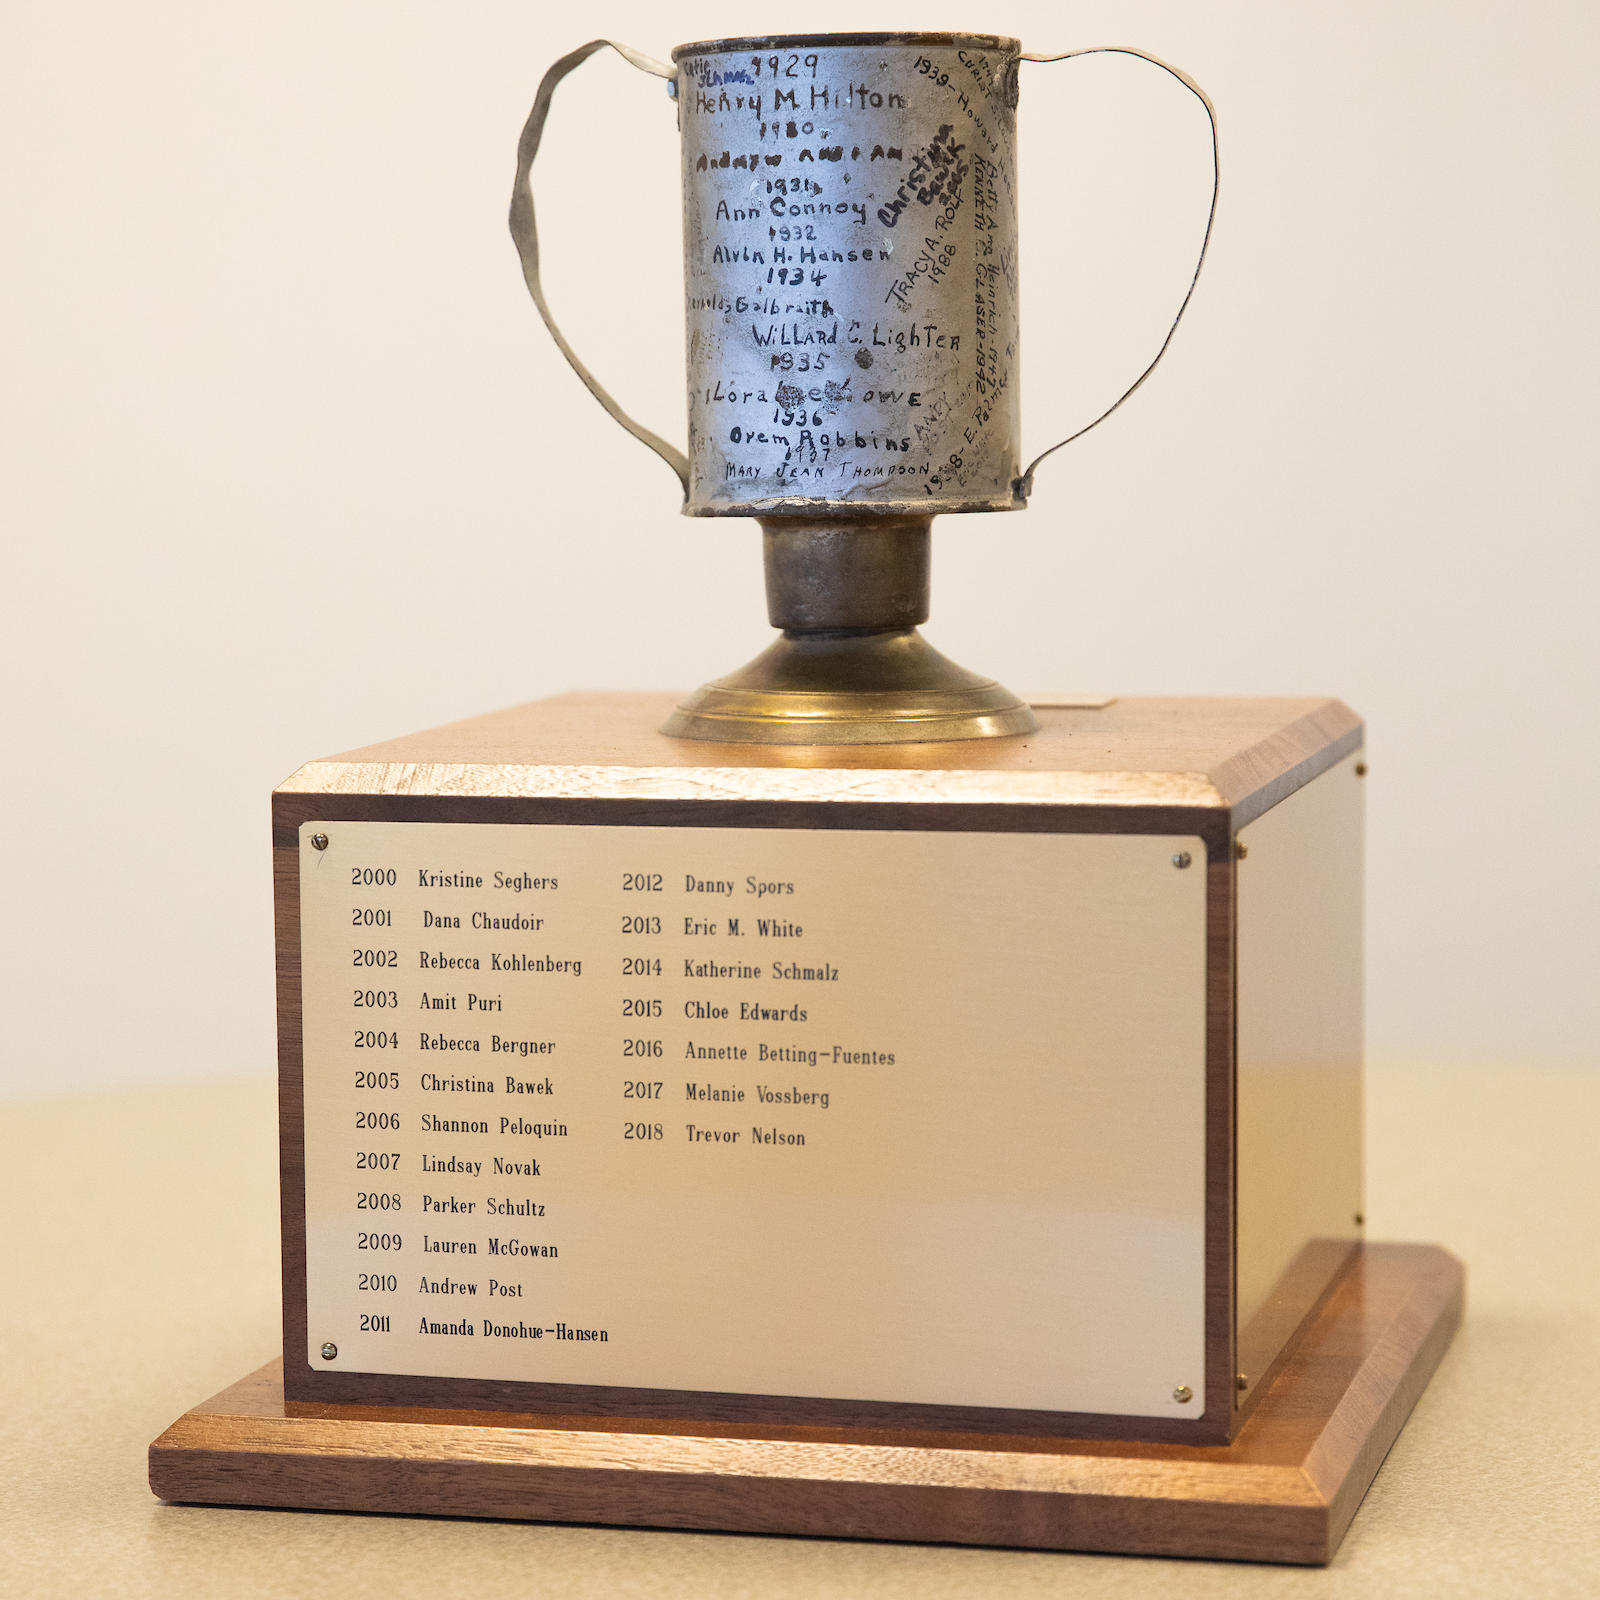 Photo of Tomato Can Loving Cup trophy